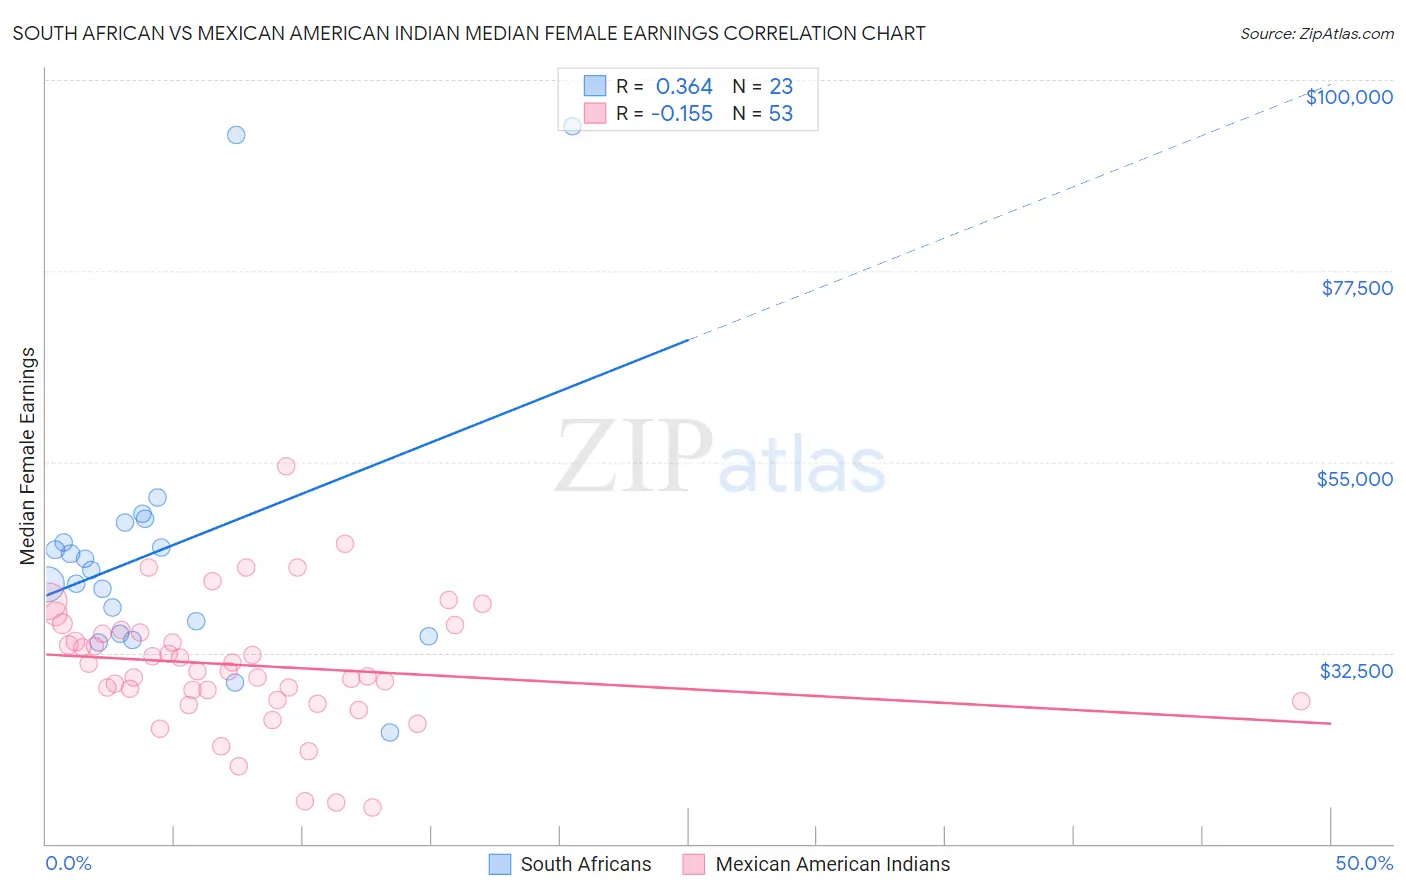 South African vs Mexican American Indian Median Female Earnings